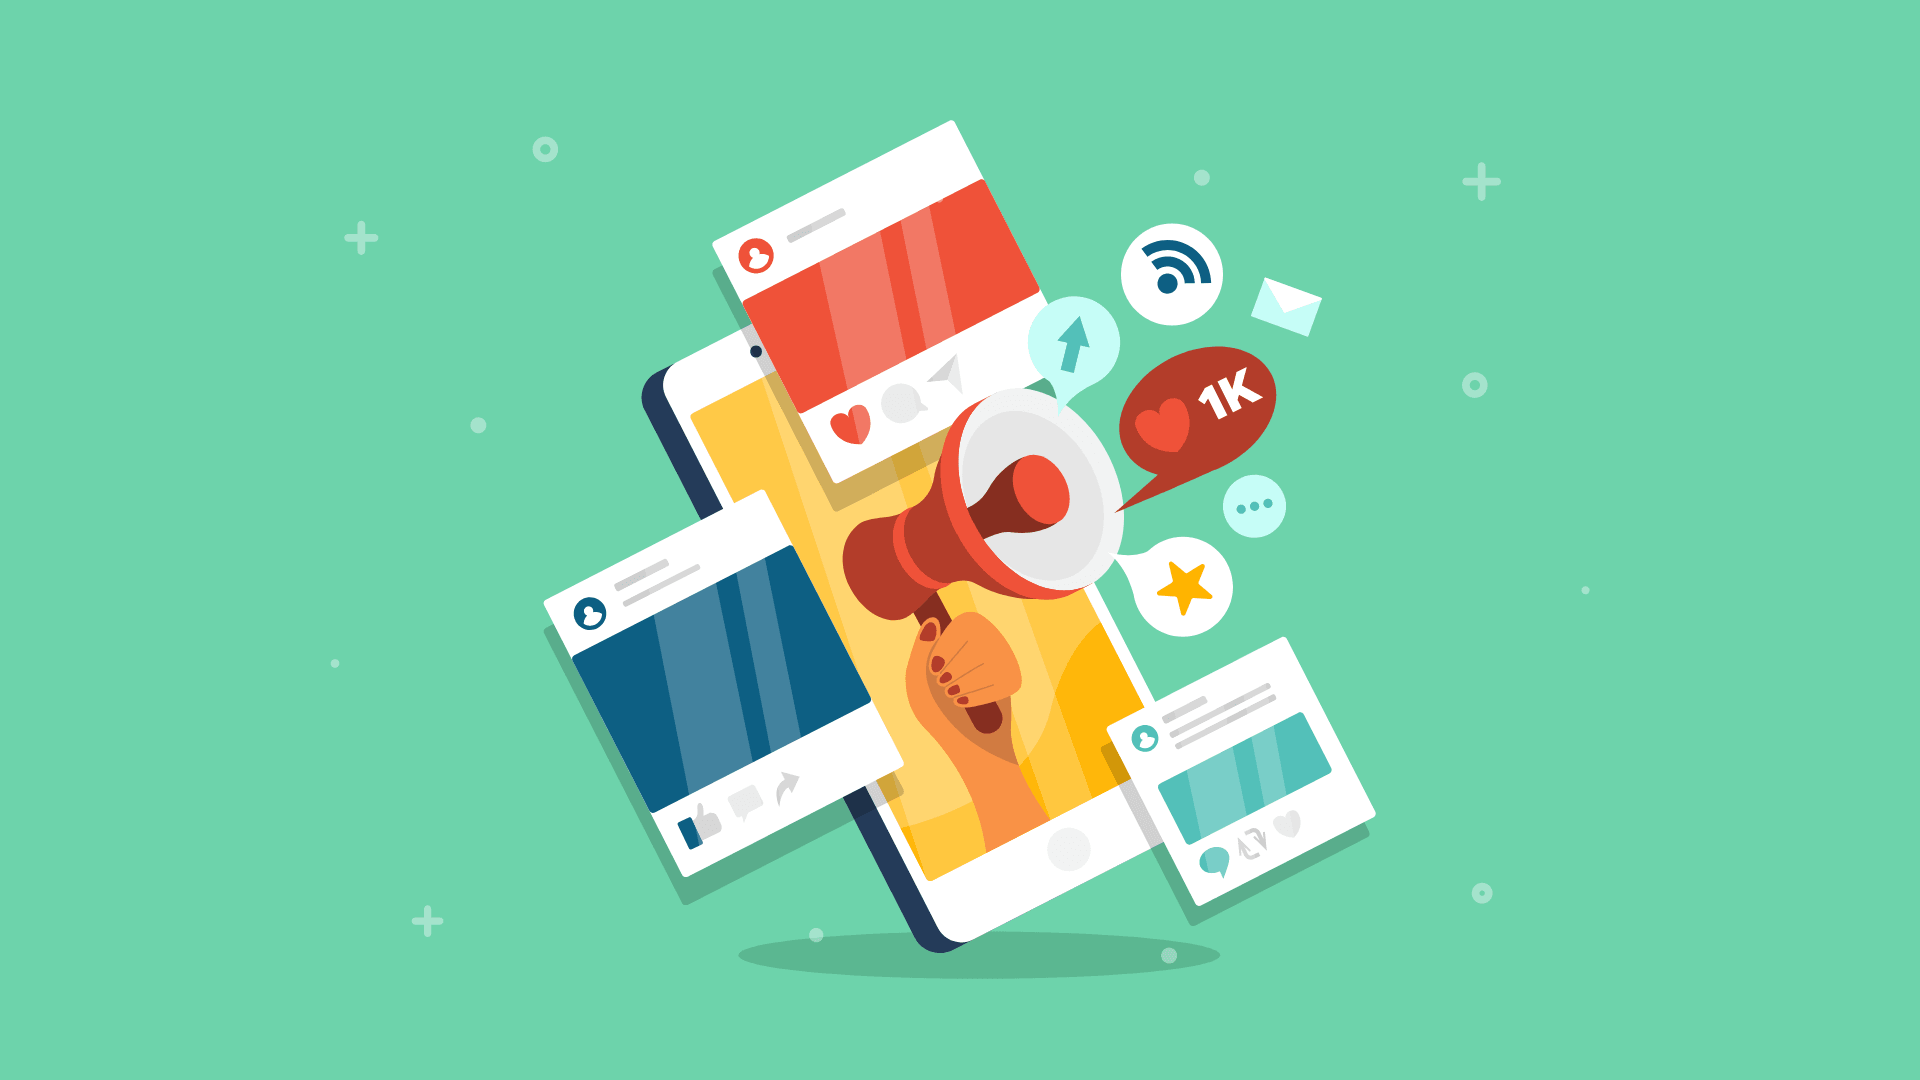 Social media apps and notifications